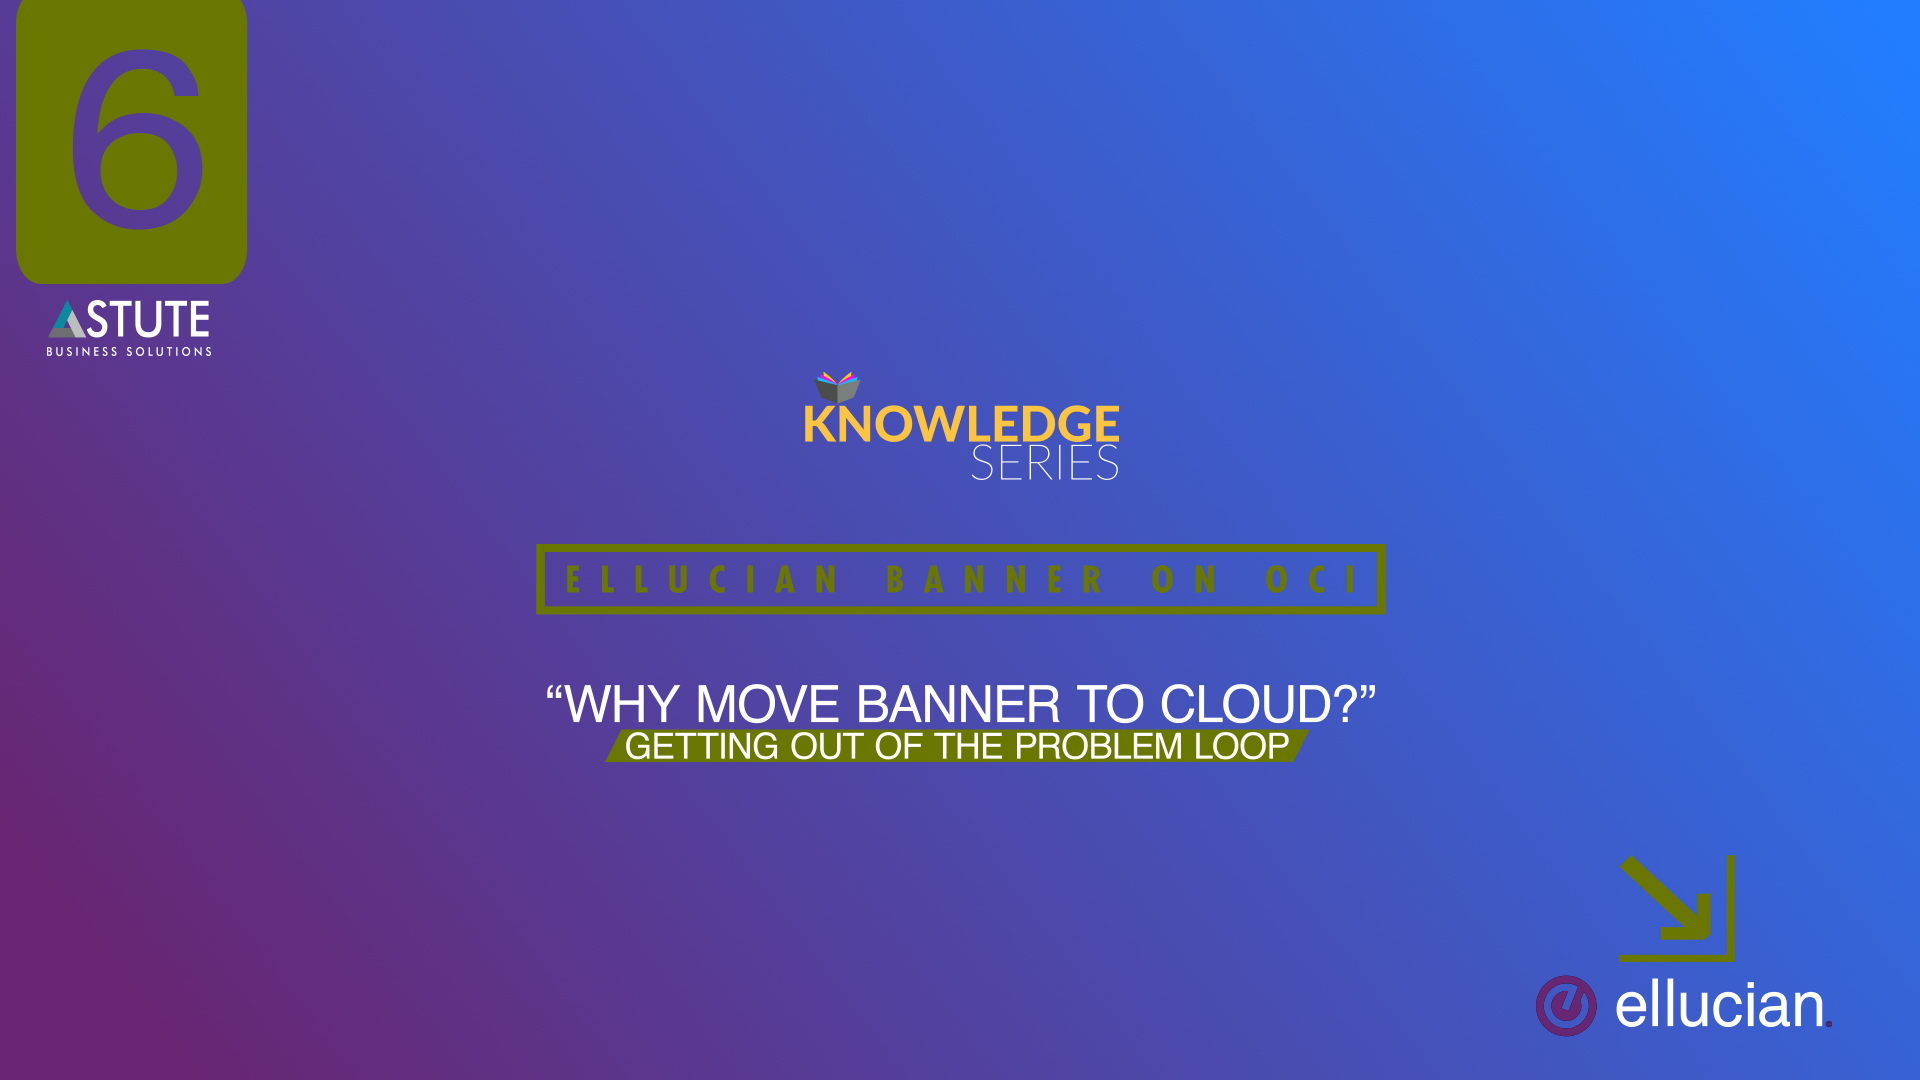 #6 Ellucian _Why Move Banner To cloud_- Getting out of the problem loop